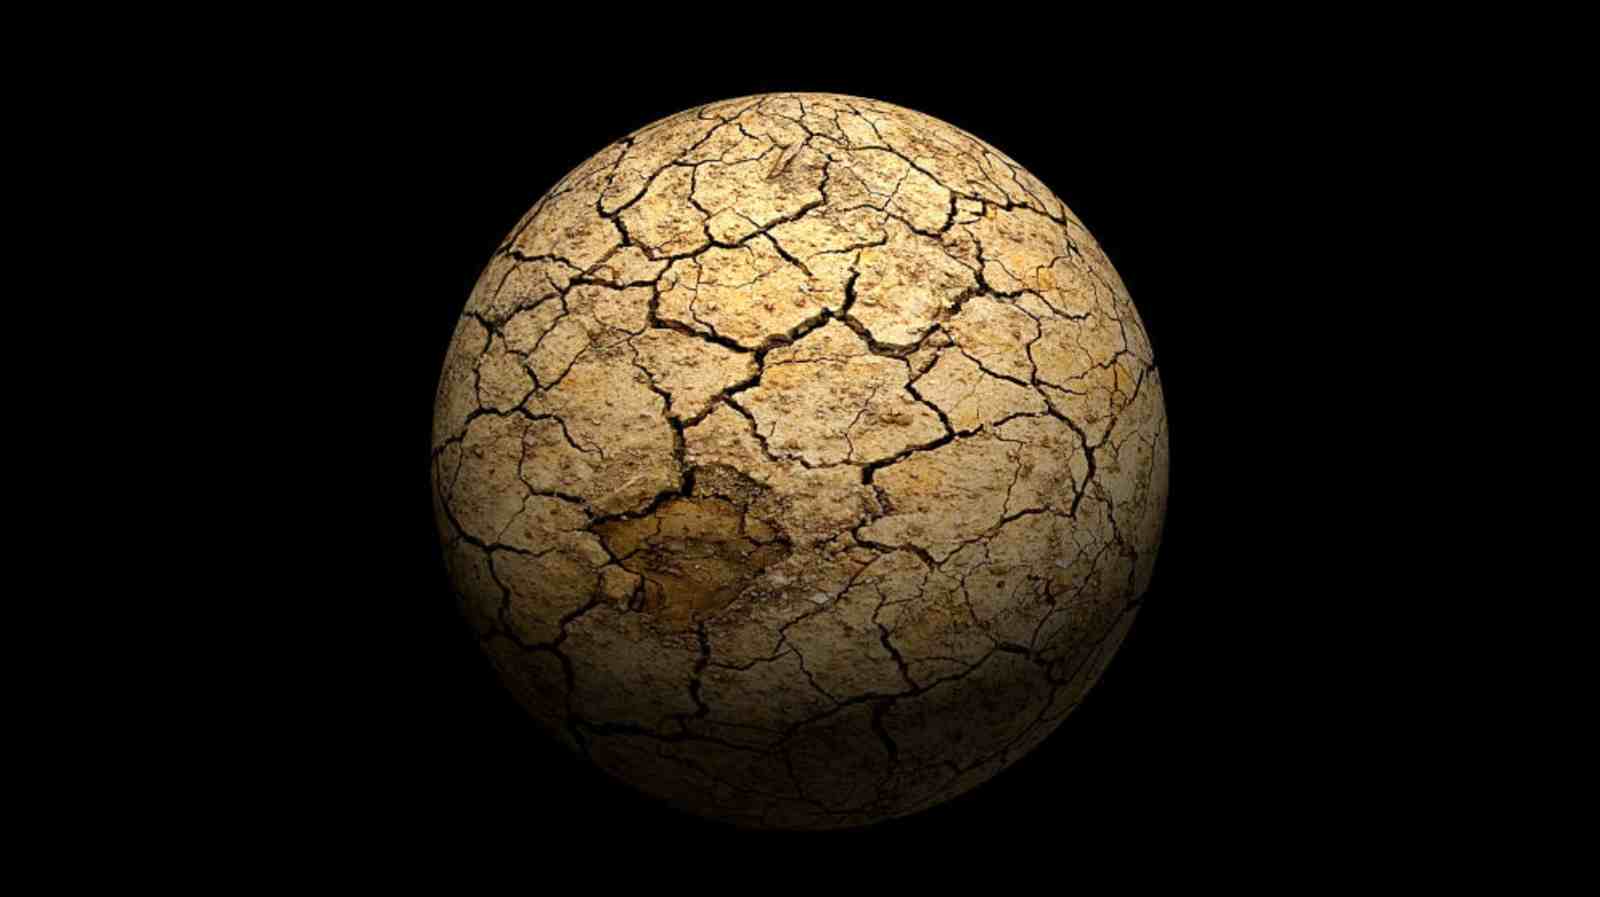 Earth without Oxygen